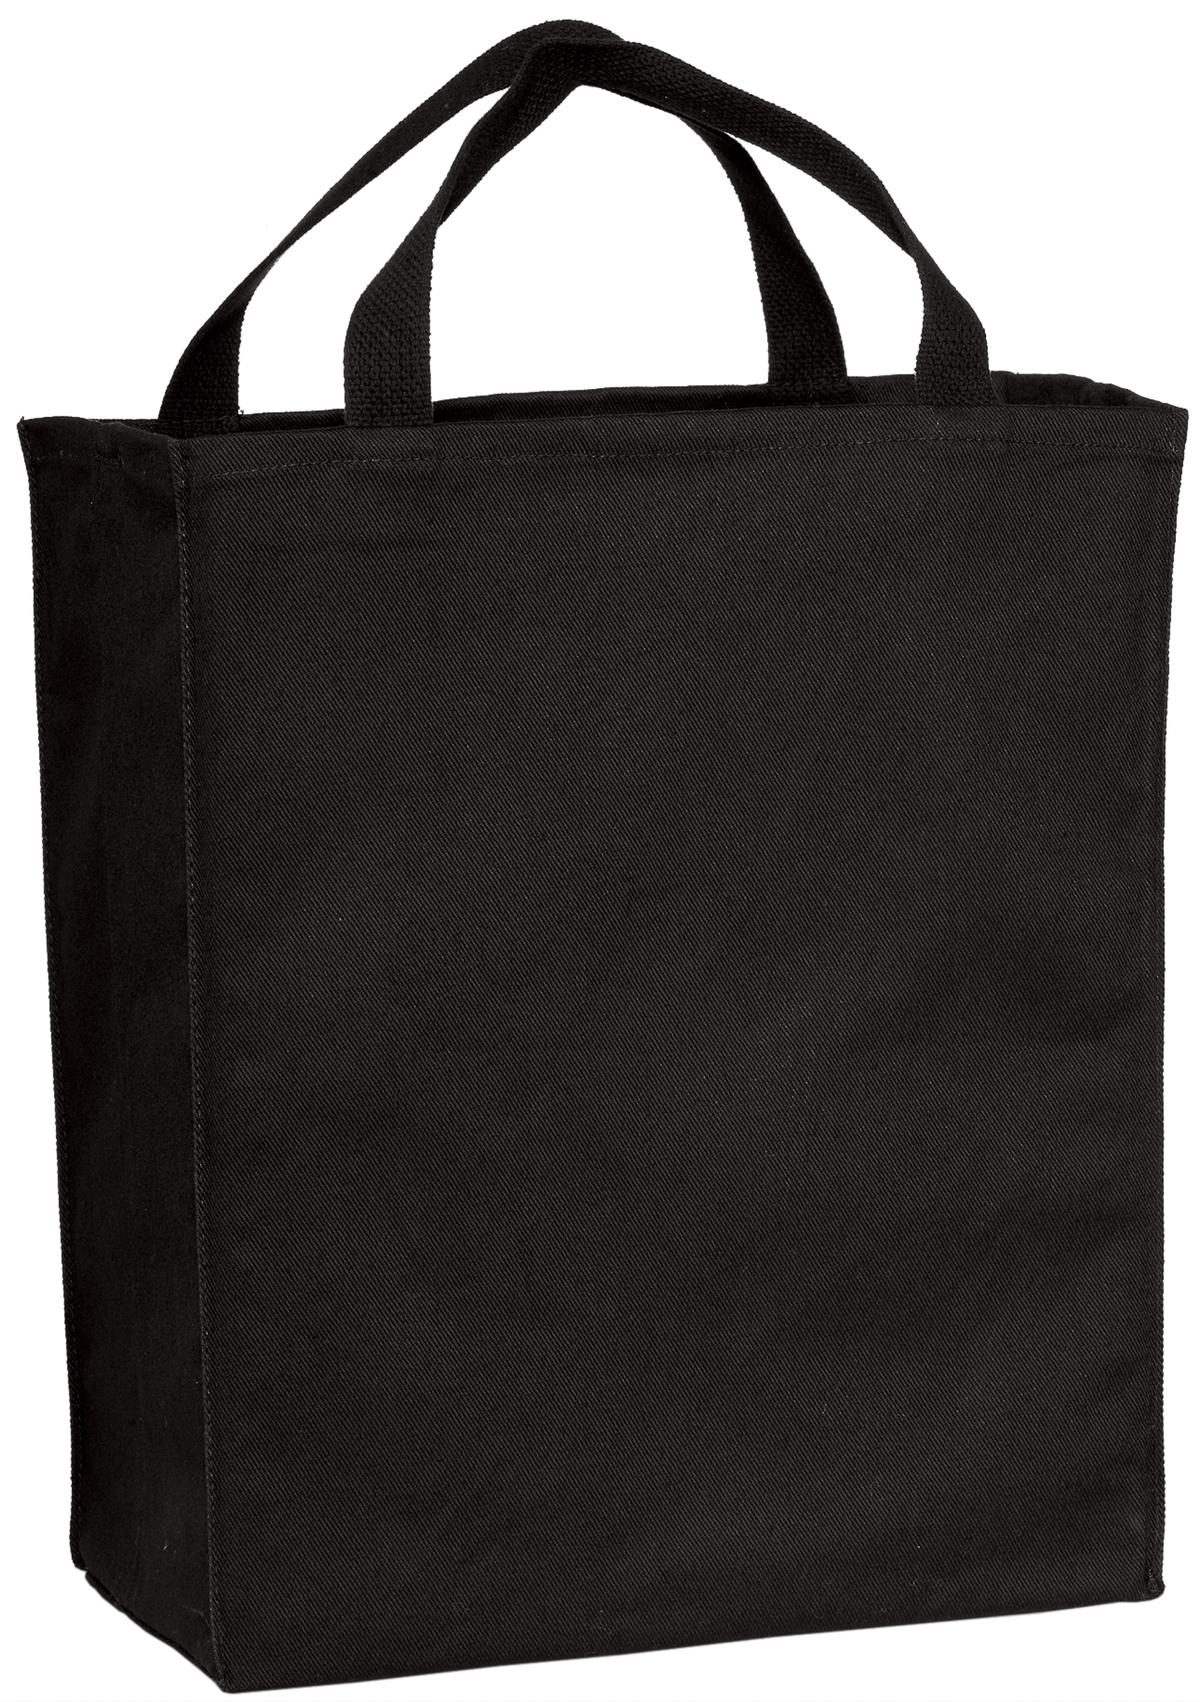 Port Authority Ideal Twill Grocery Tote - B100